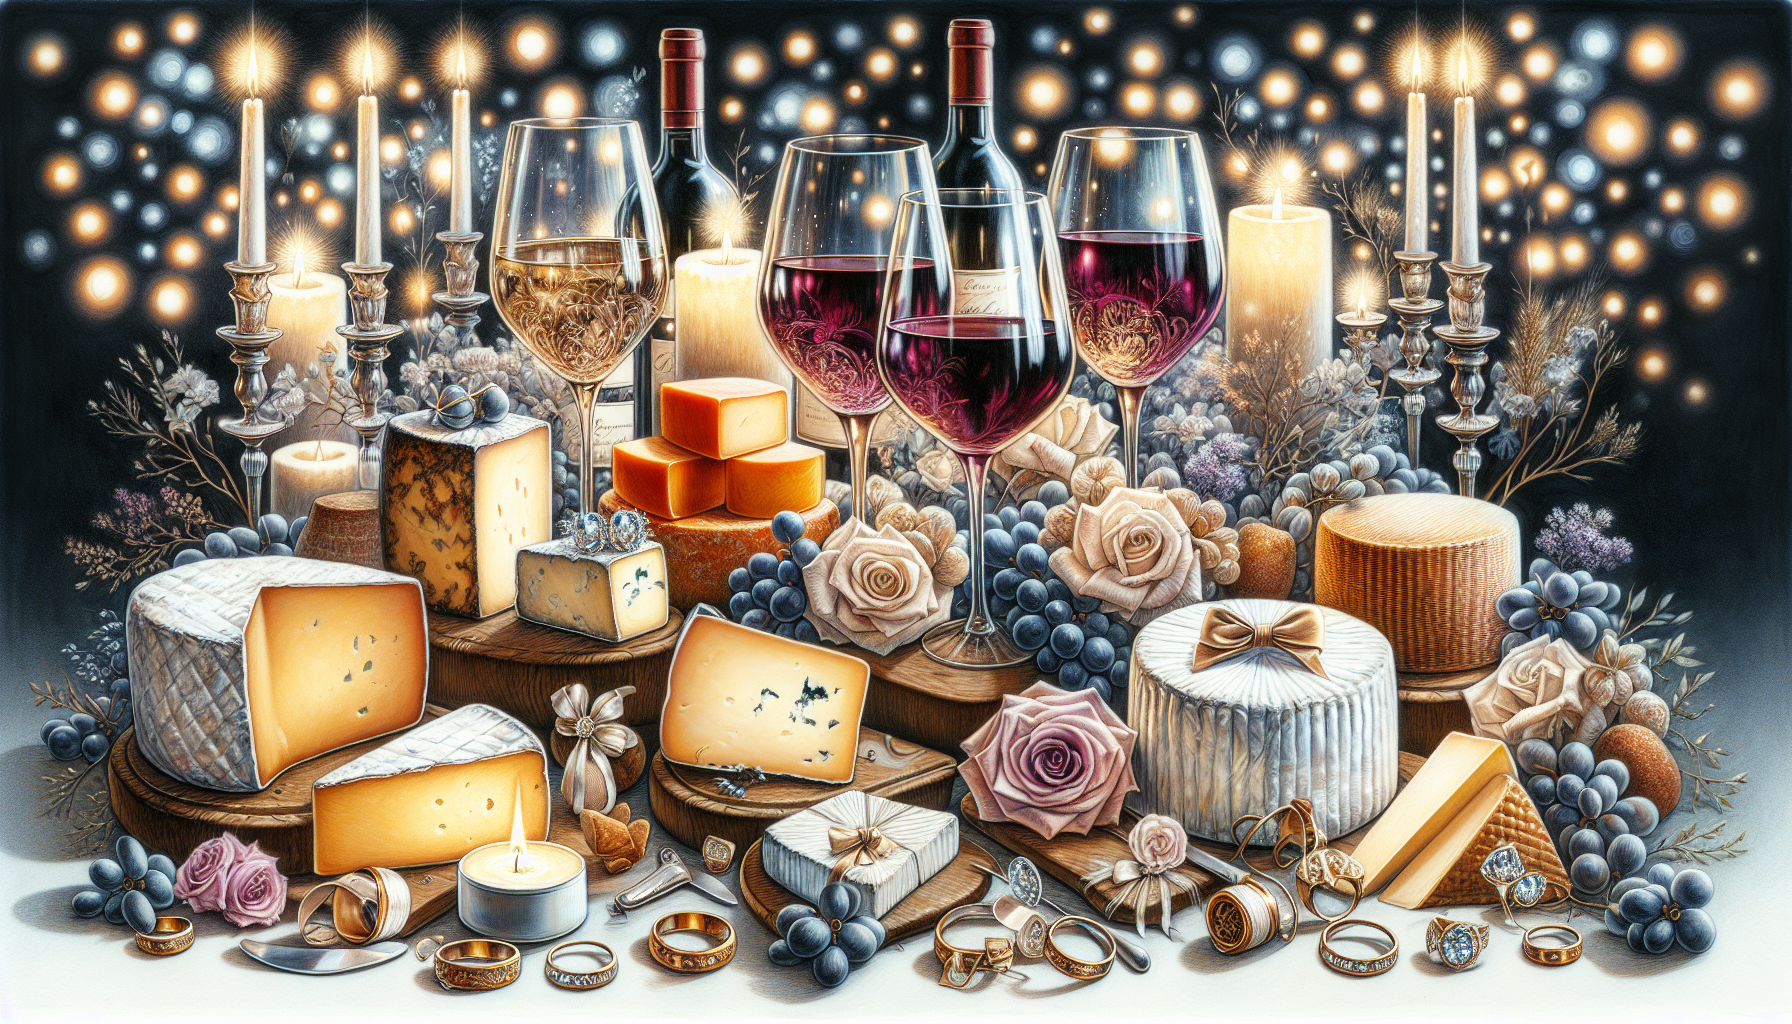 Illustration of cheese pairings wine, with unoaked chardonnay 